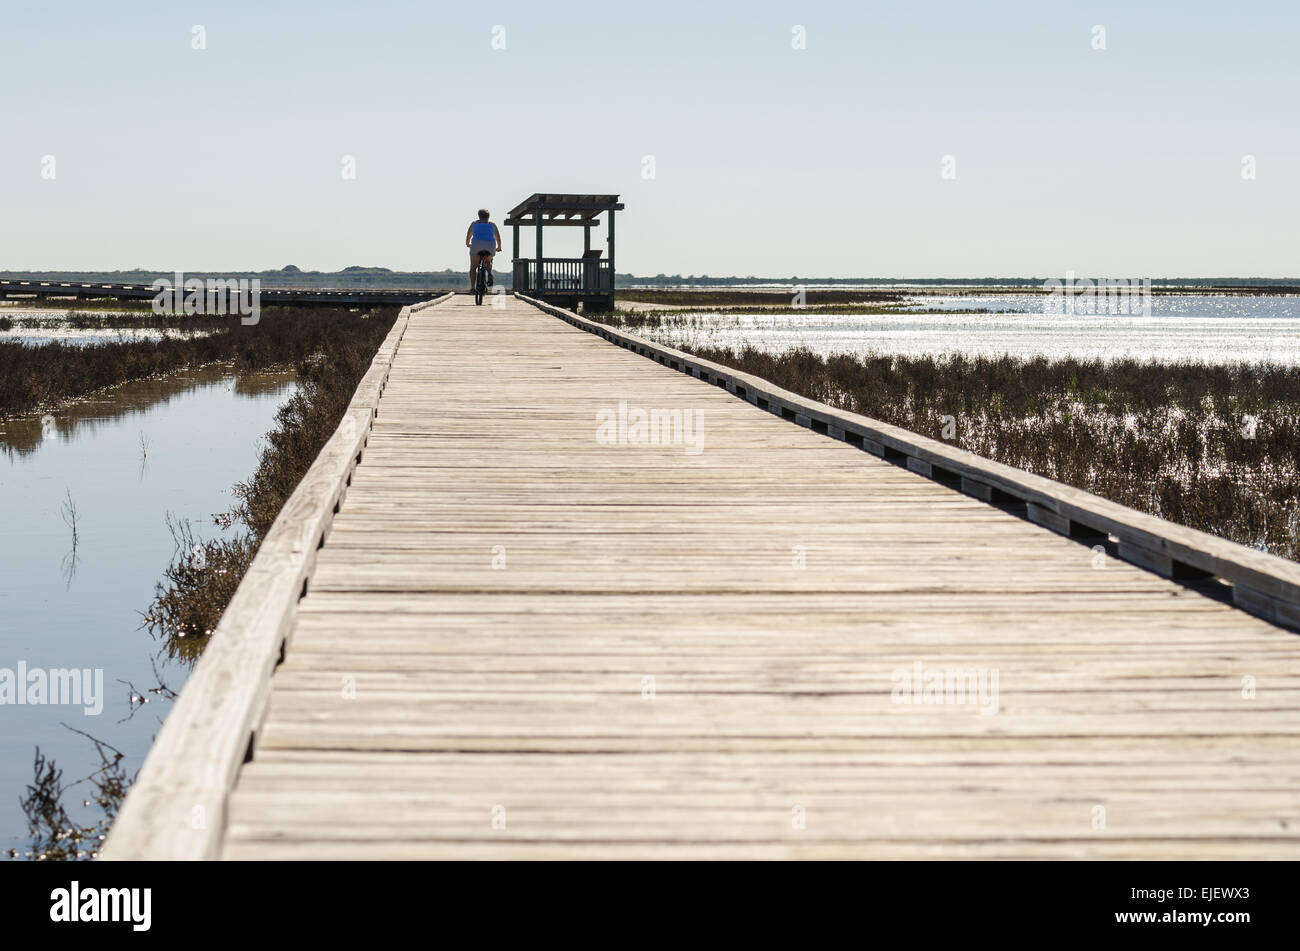 Person getting their exercise riding a bike on the boardwalk through a nature preserve and bird sanctuary Stock Photo